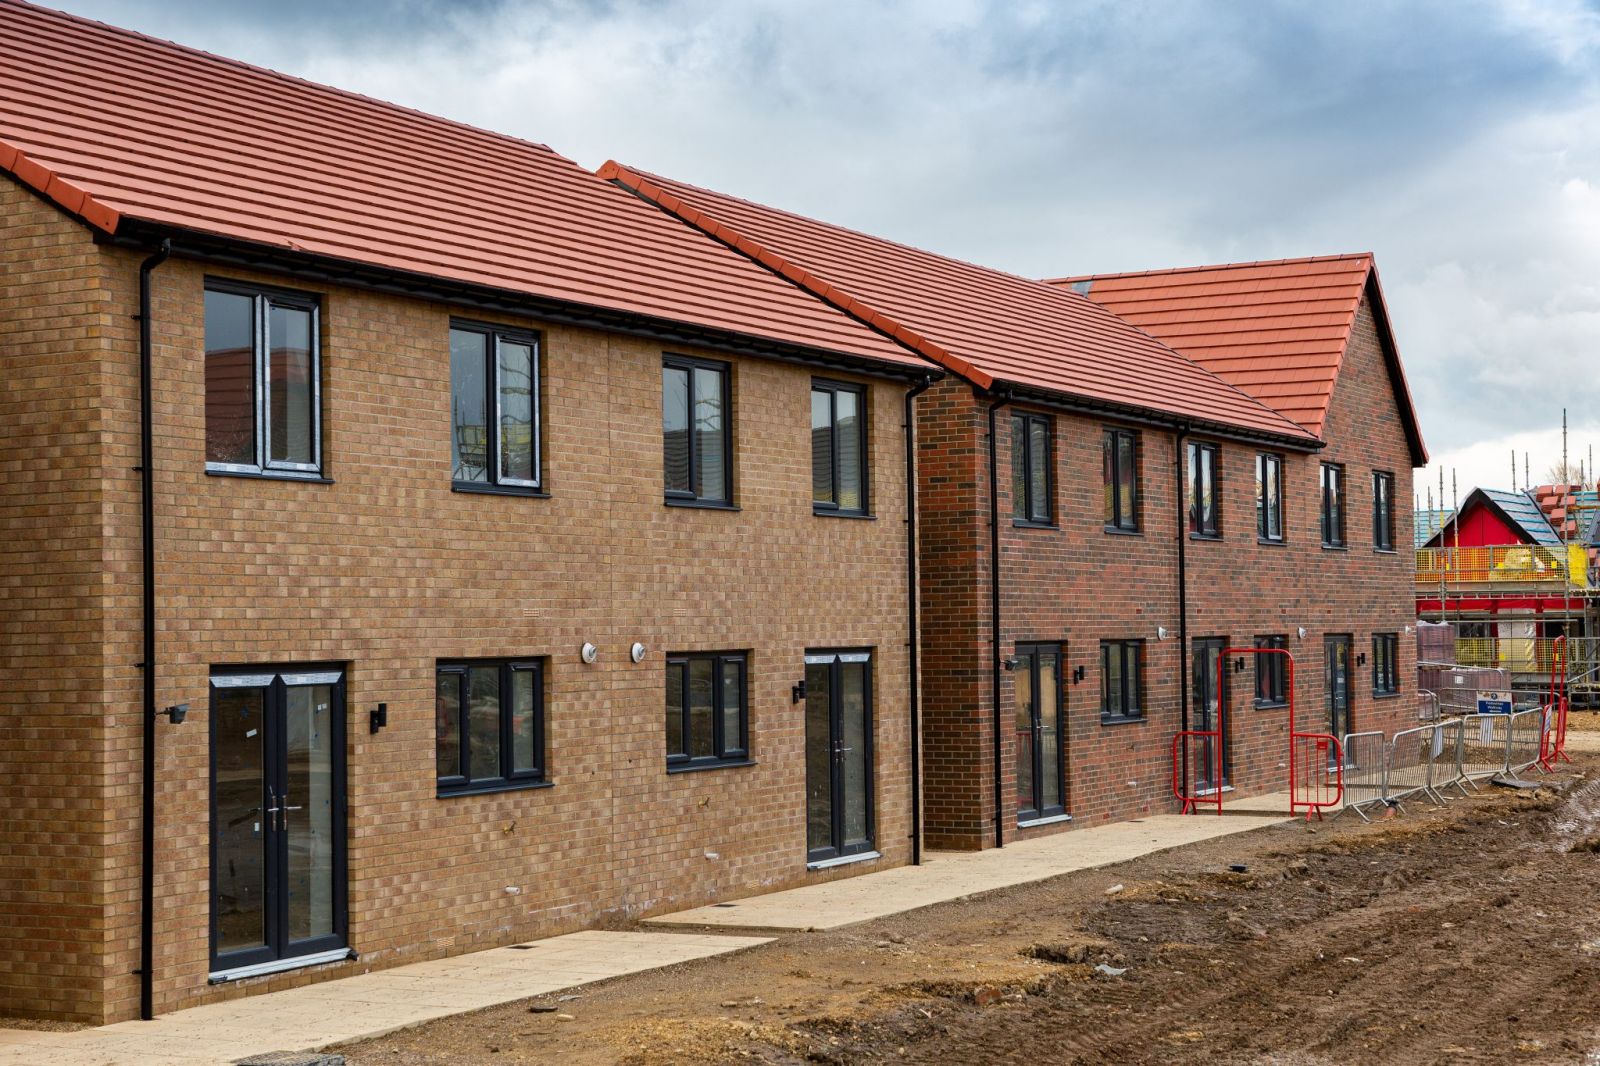 Two storey modern homes at Kedward. The ground is still under construction.